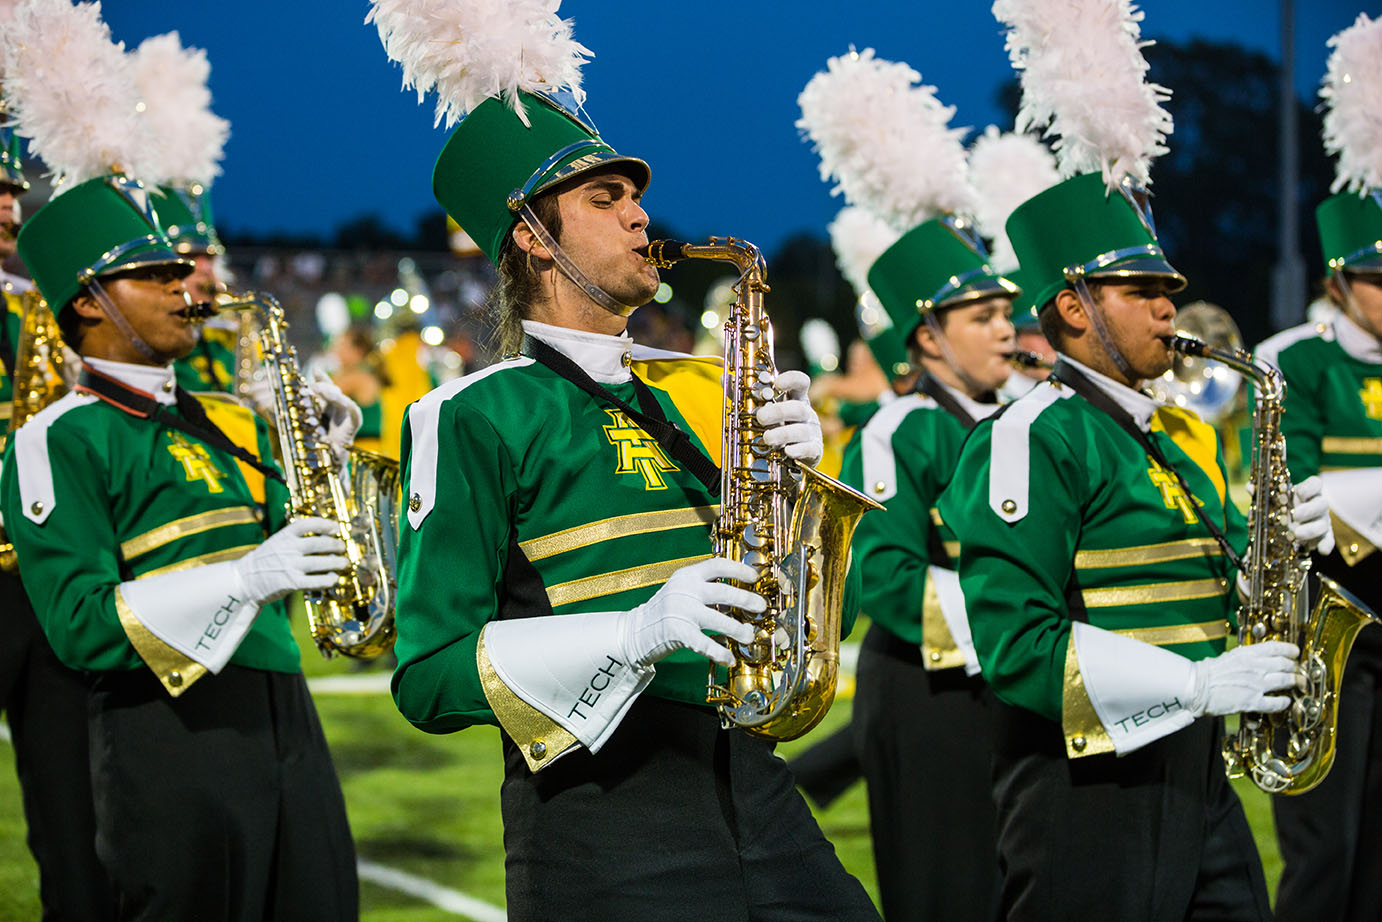 a photo of the award winning ATU marching band, The Band of Distinction